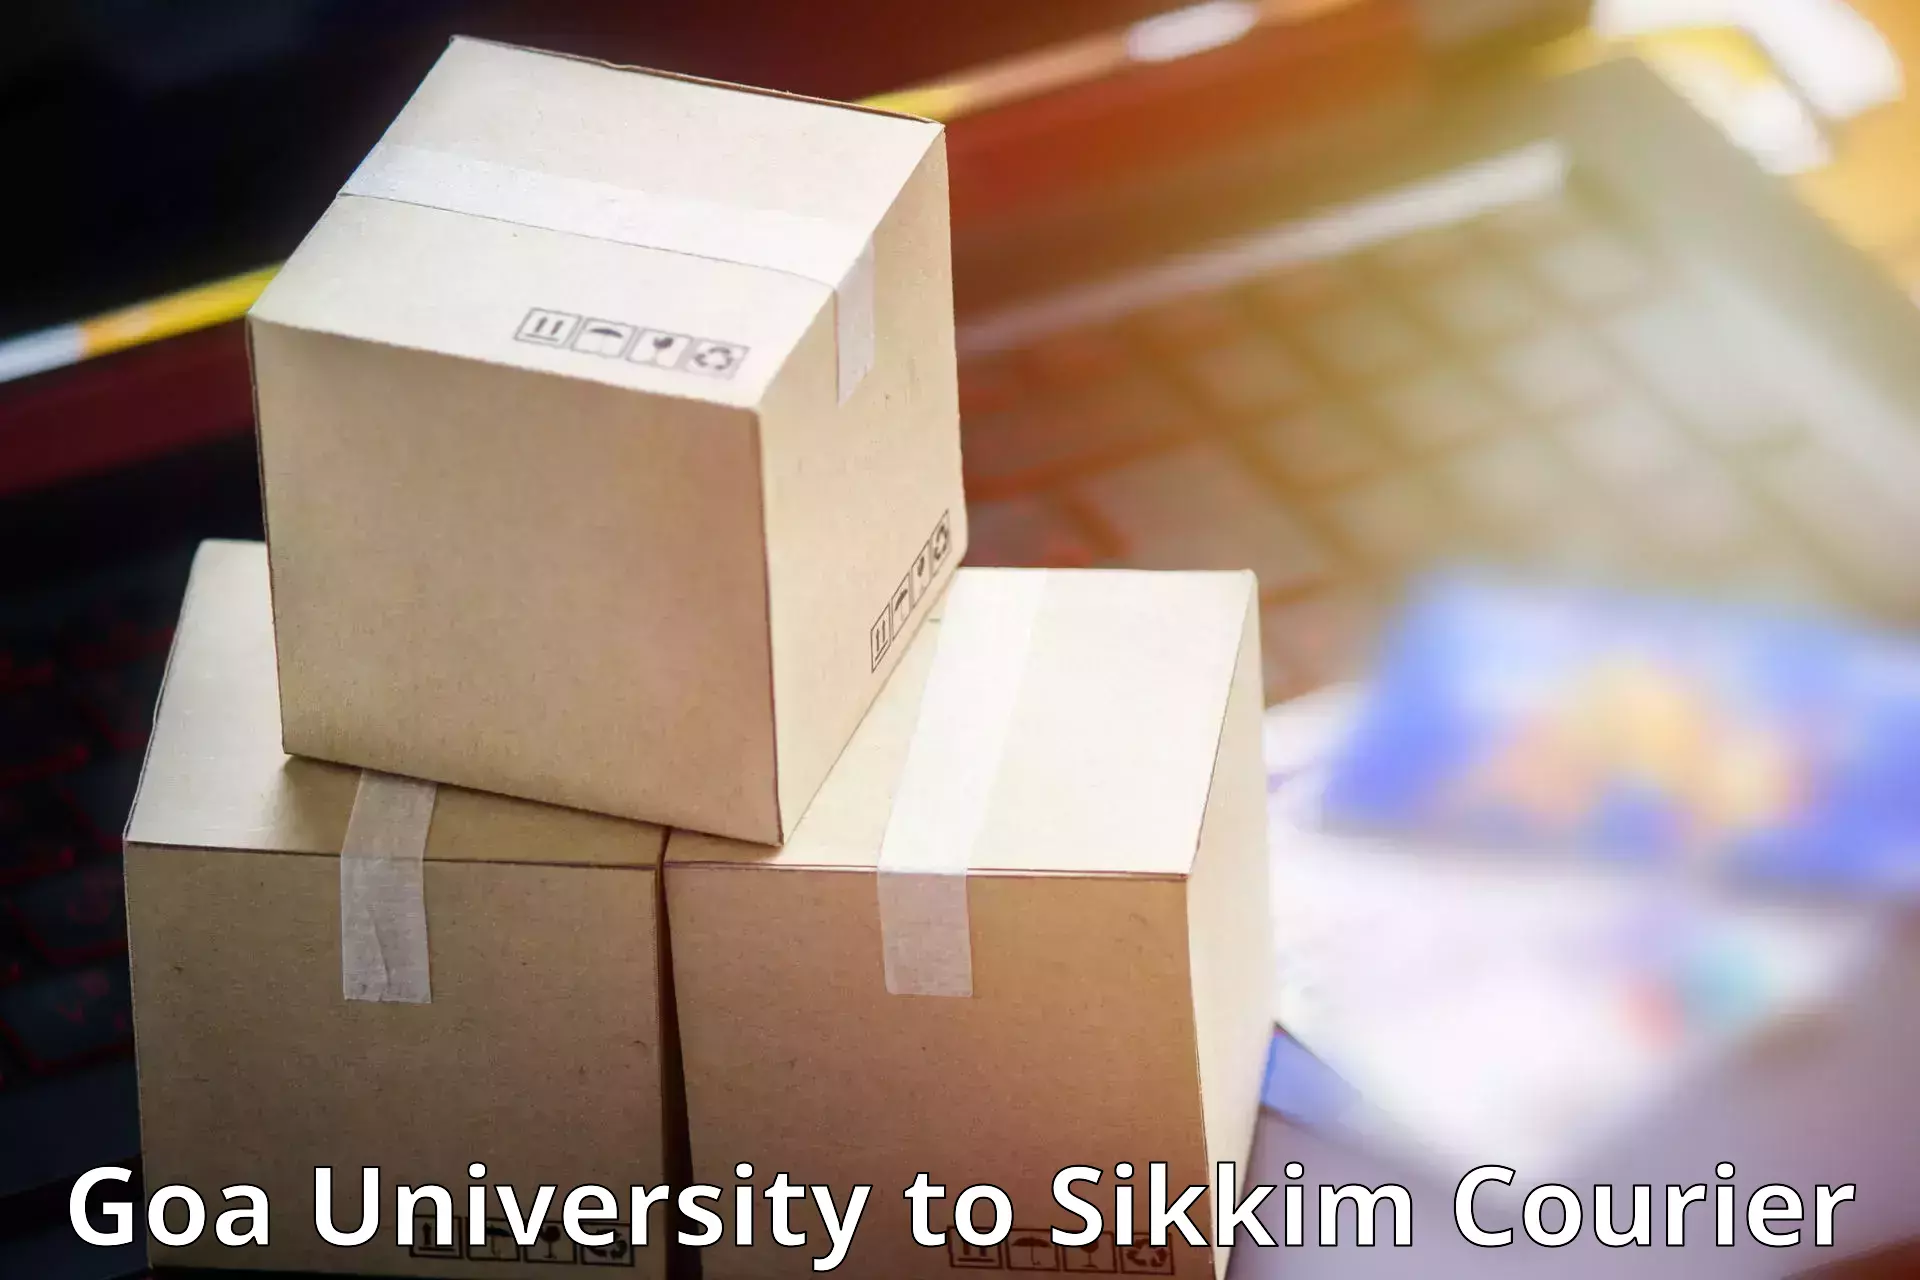 International courier networks Goa University to North Sikkim